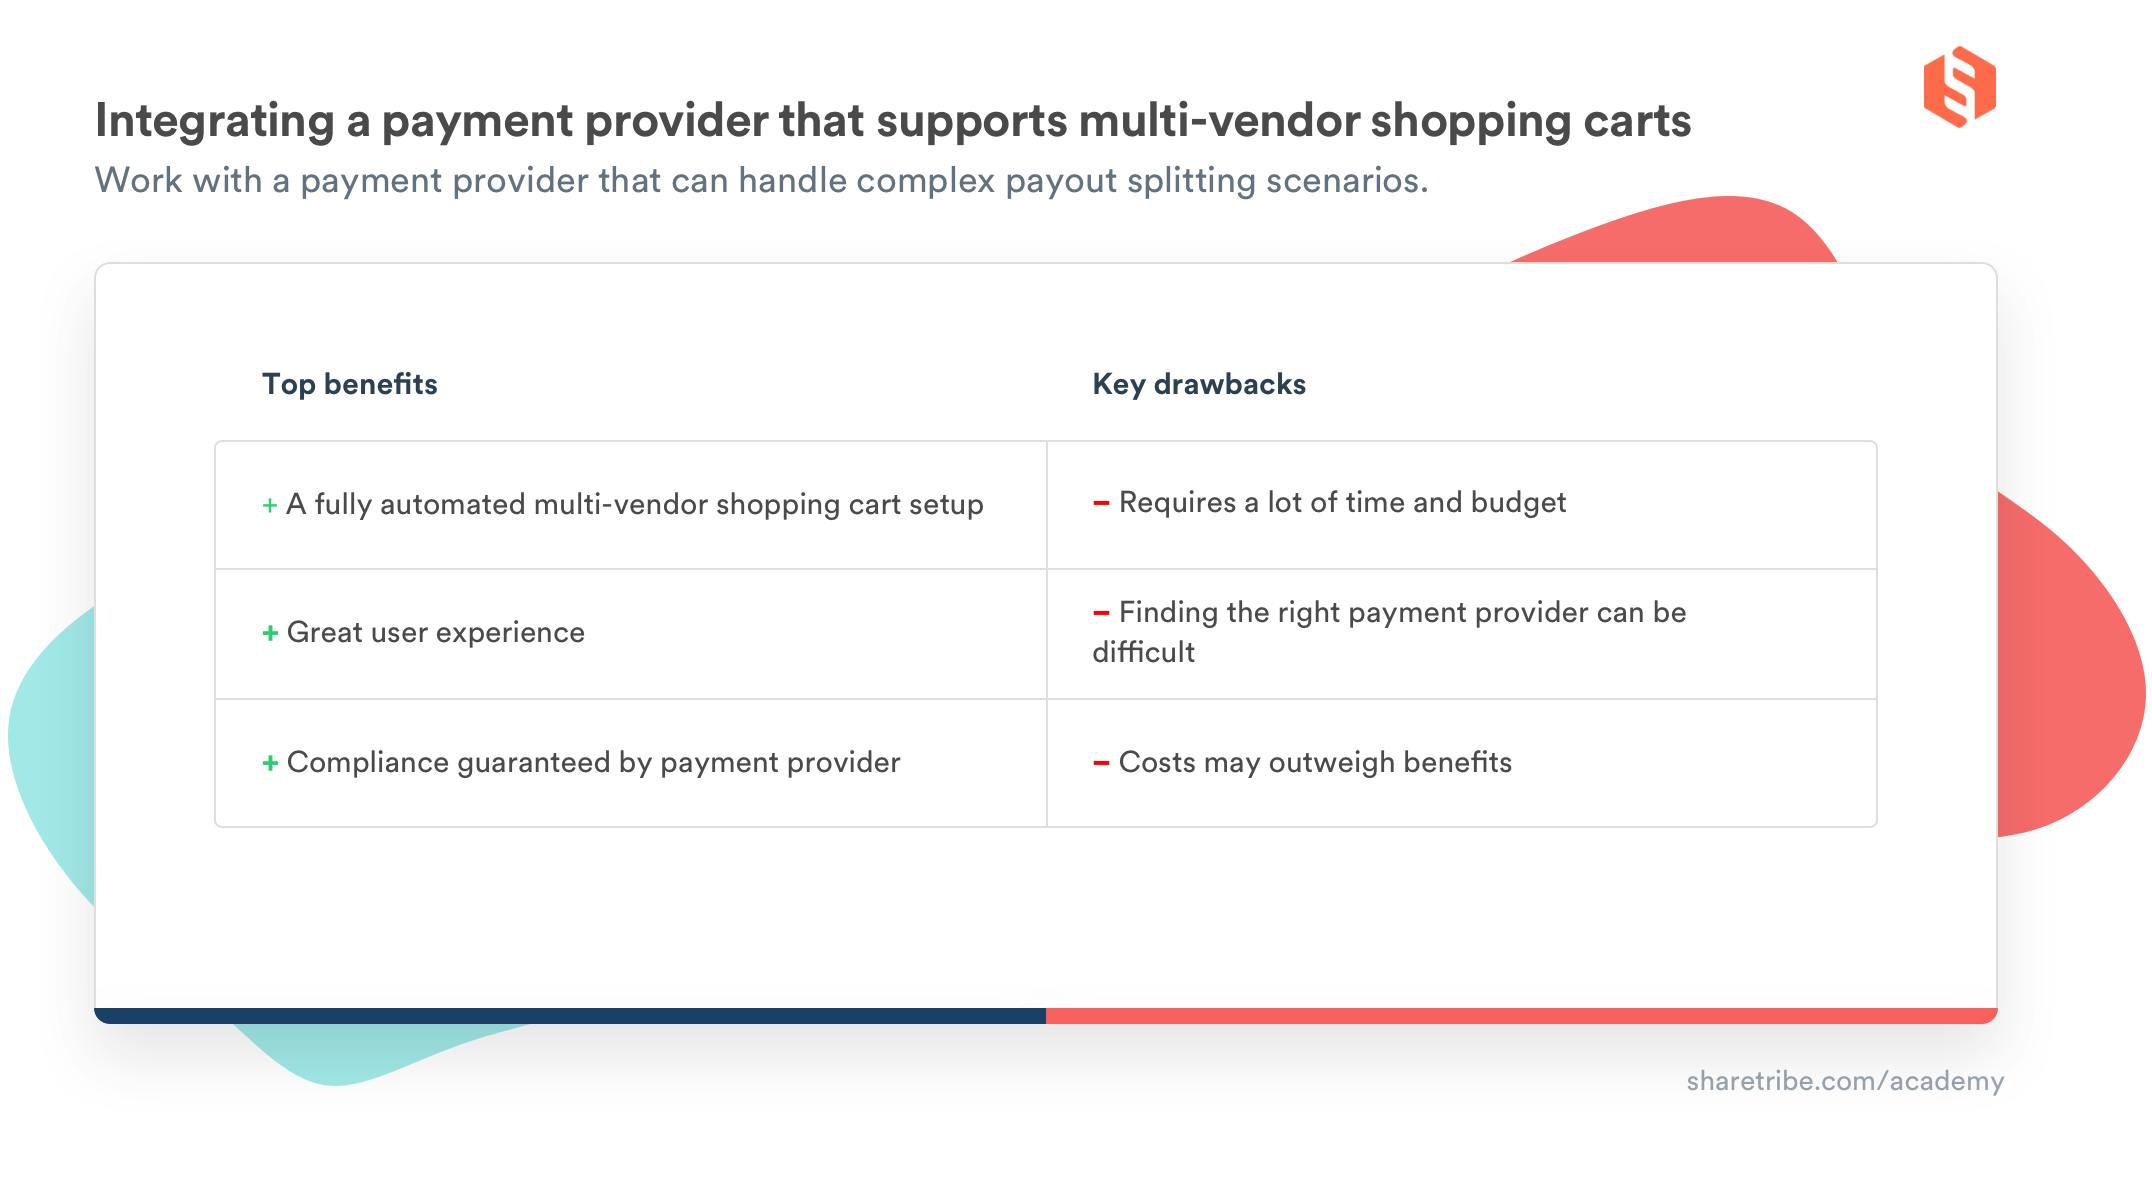 A table with the top benefits and key drawbacks of integrating a payment provider that supports multi-vendor shopping carts. Top benefits: a fully automated multi-vendor shopping cart setup, great user experience, compliance guaranteed by payment provider. Key drawbacks: requires a lot of time and budget, finding the right payment provider can be difficult, costs may outweigh benefits